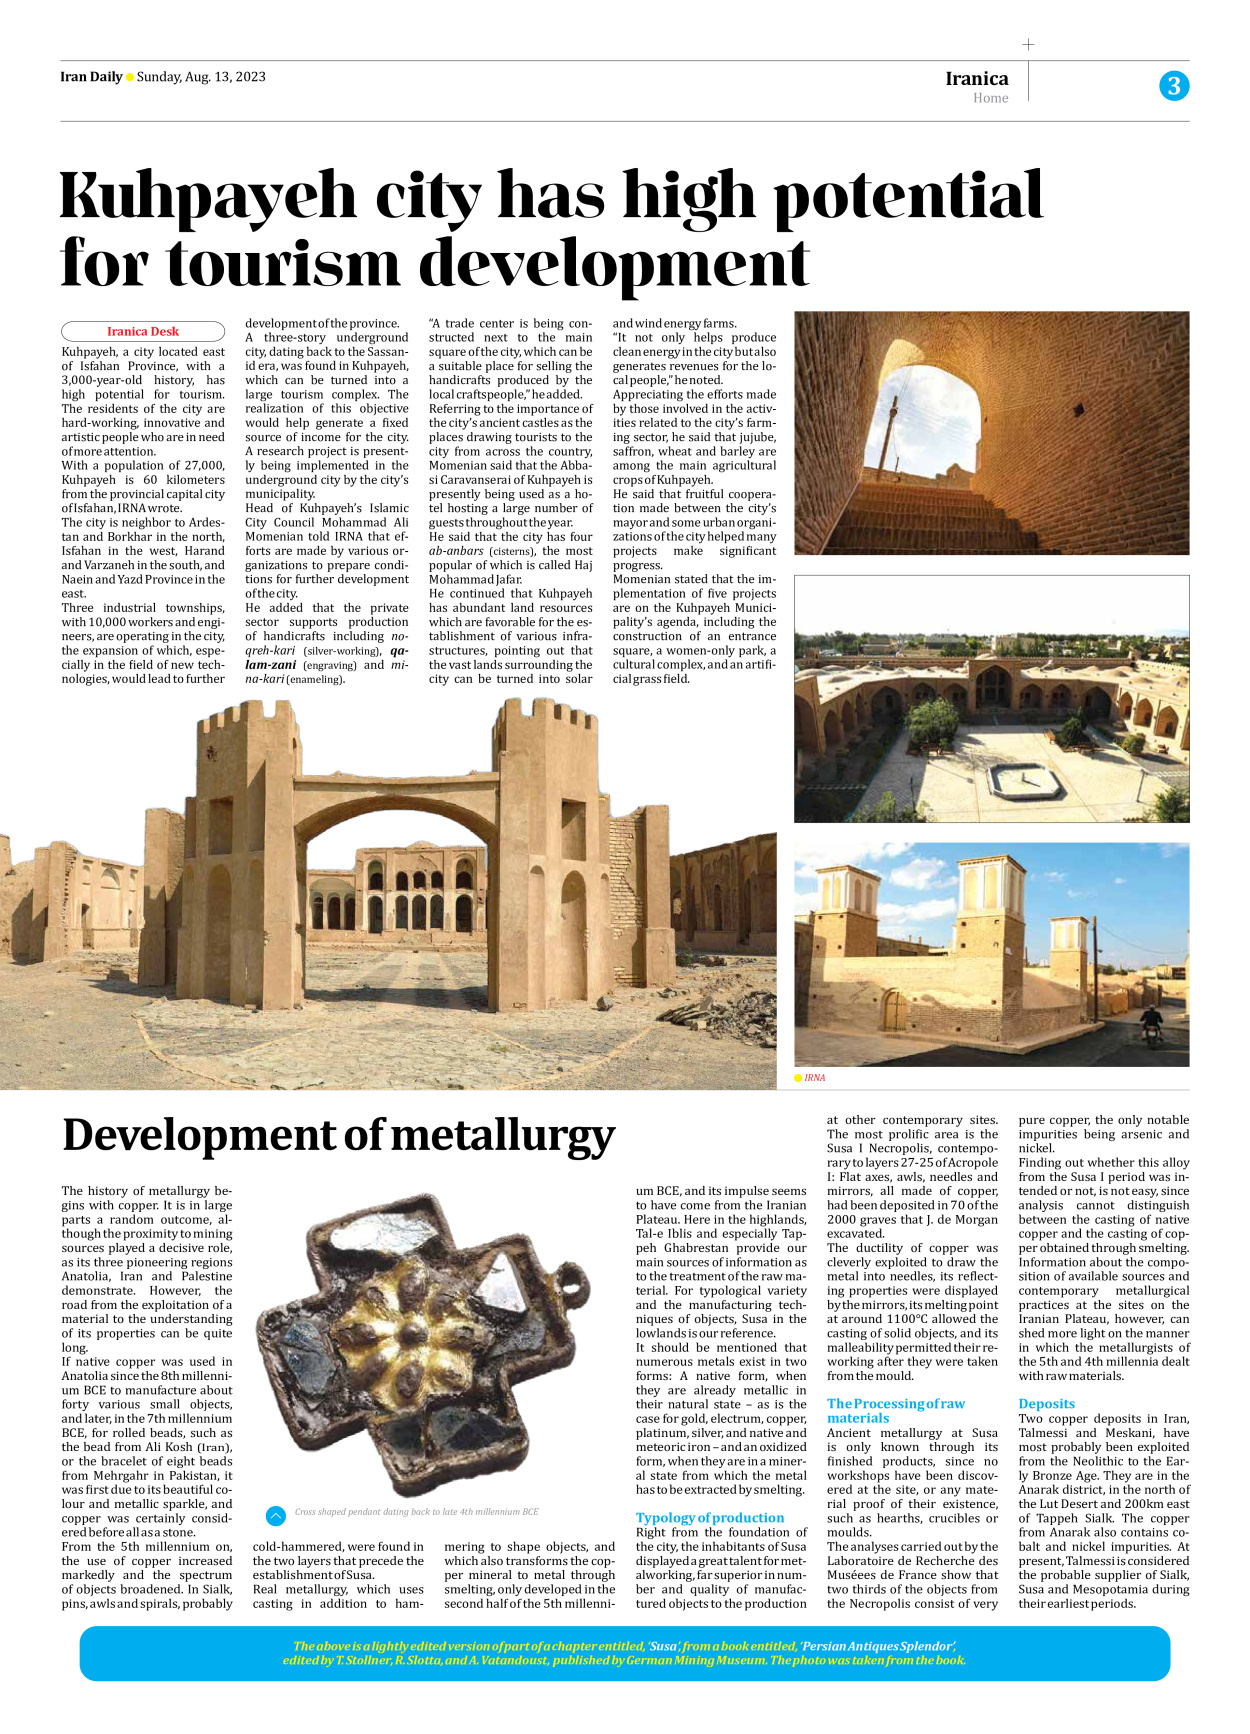 Iran Daily - Number Seven Thousand Three Hundred and Sixty One - 13 August 2023 - Page 3